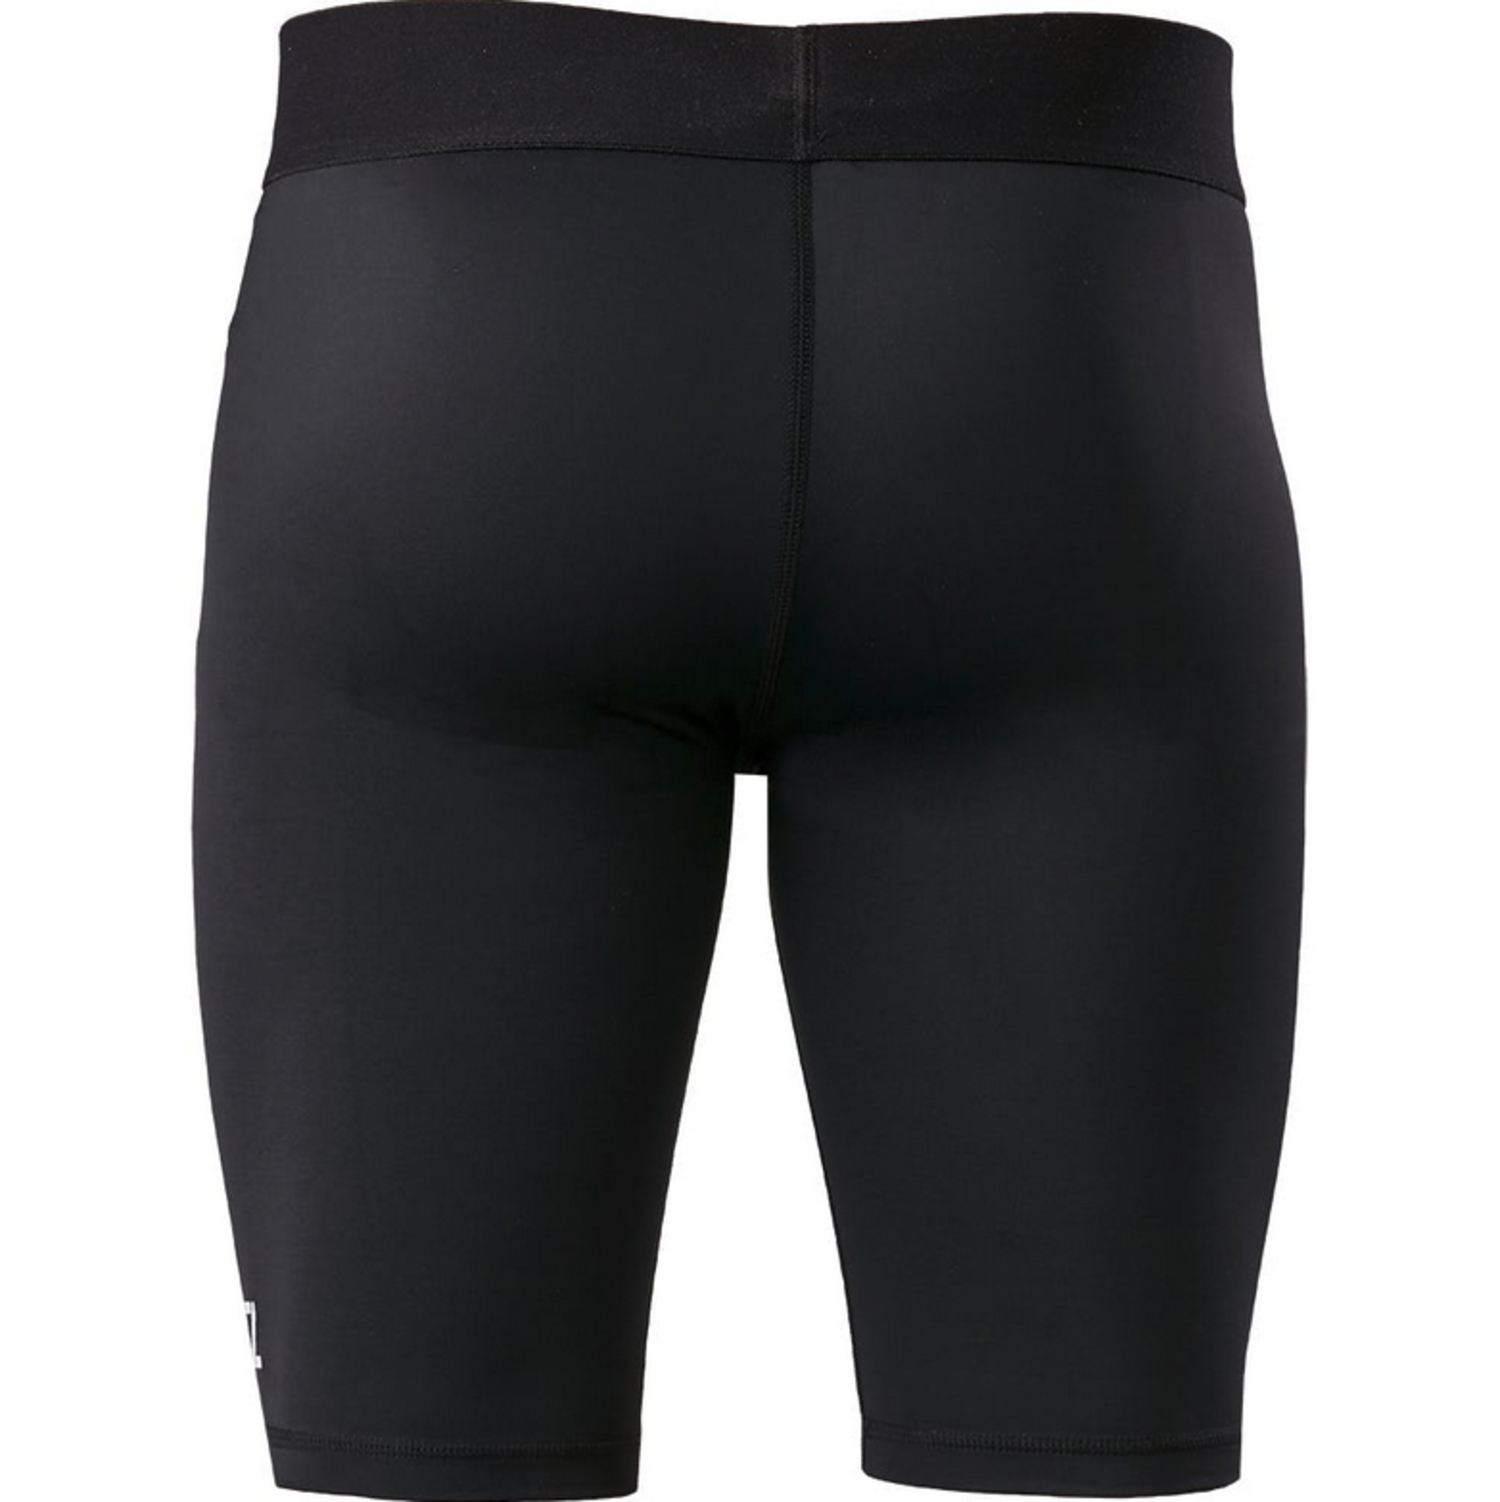 Compression Shorts With Groin Guard Cup - Enso Martial Arts Shop